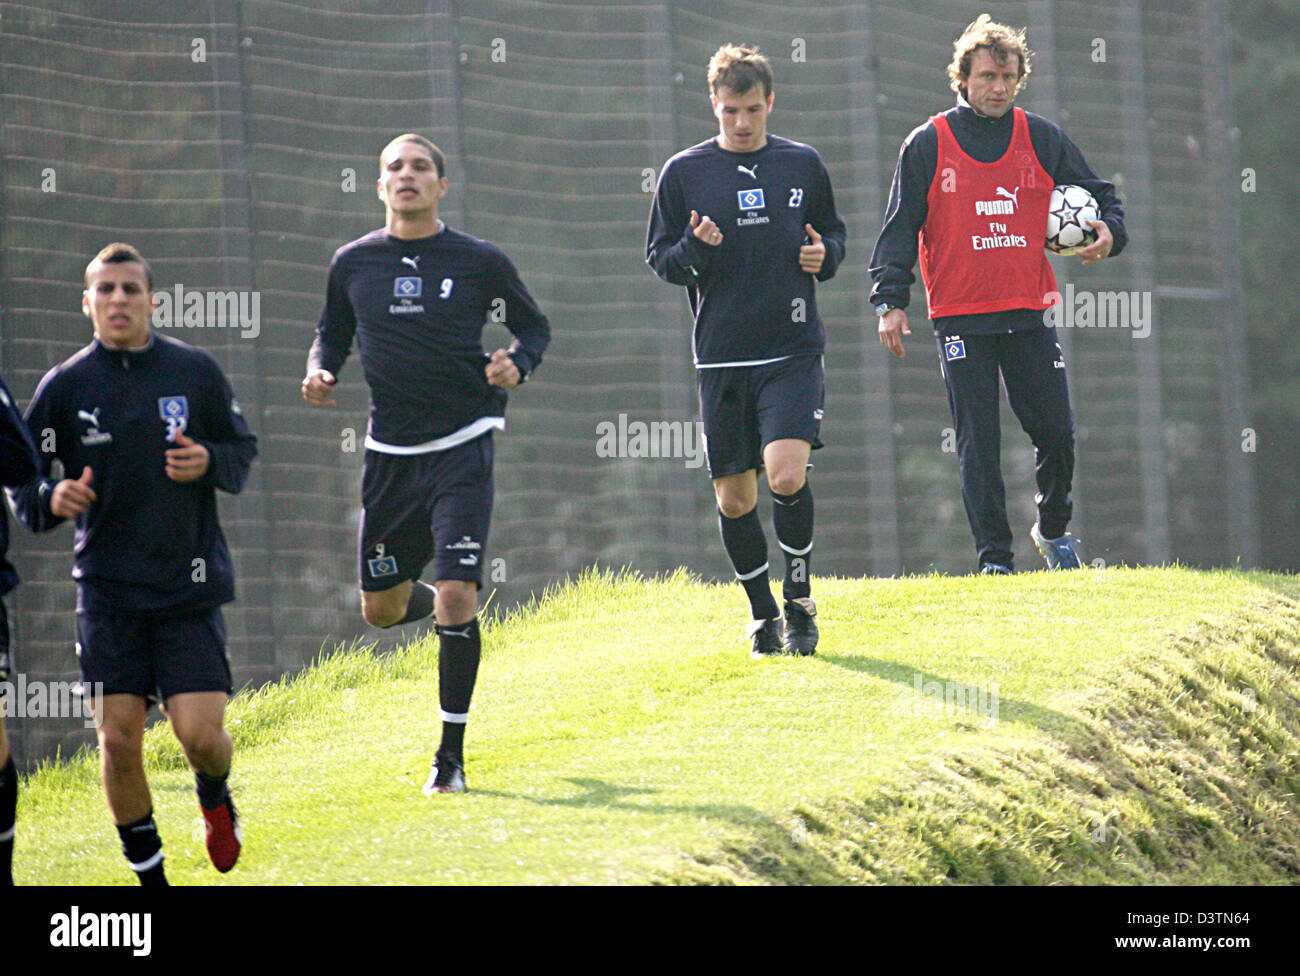 HSV head coach Thomas Doll (R) directs a training session in Hamburg, Germany, Thursday, 19 October 2006. Players Benny Feilhaber (L-R), Jose Paolo Guerrero and Raphael van der Vaart pass the coach. The Hamburg SV has not won any of the last 14 competitive matches. Photo: Maurizio Gambarini Stock Photo